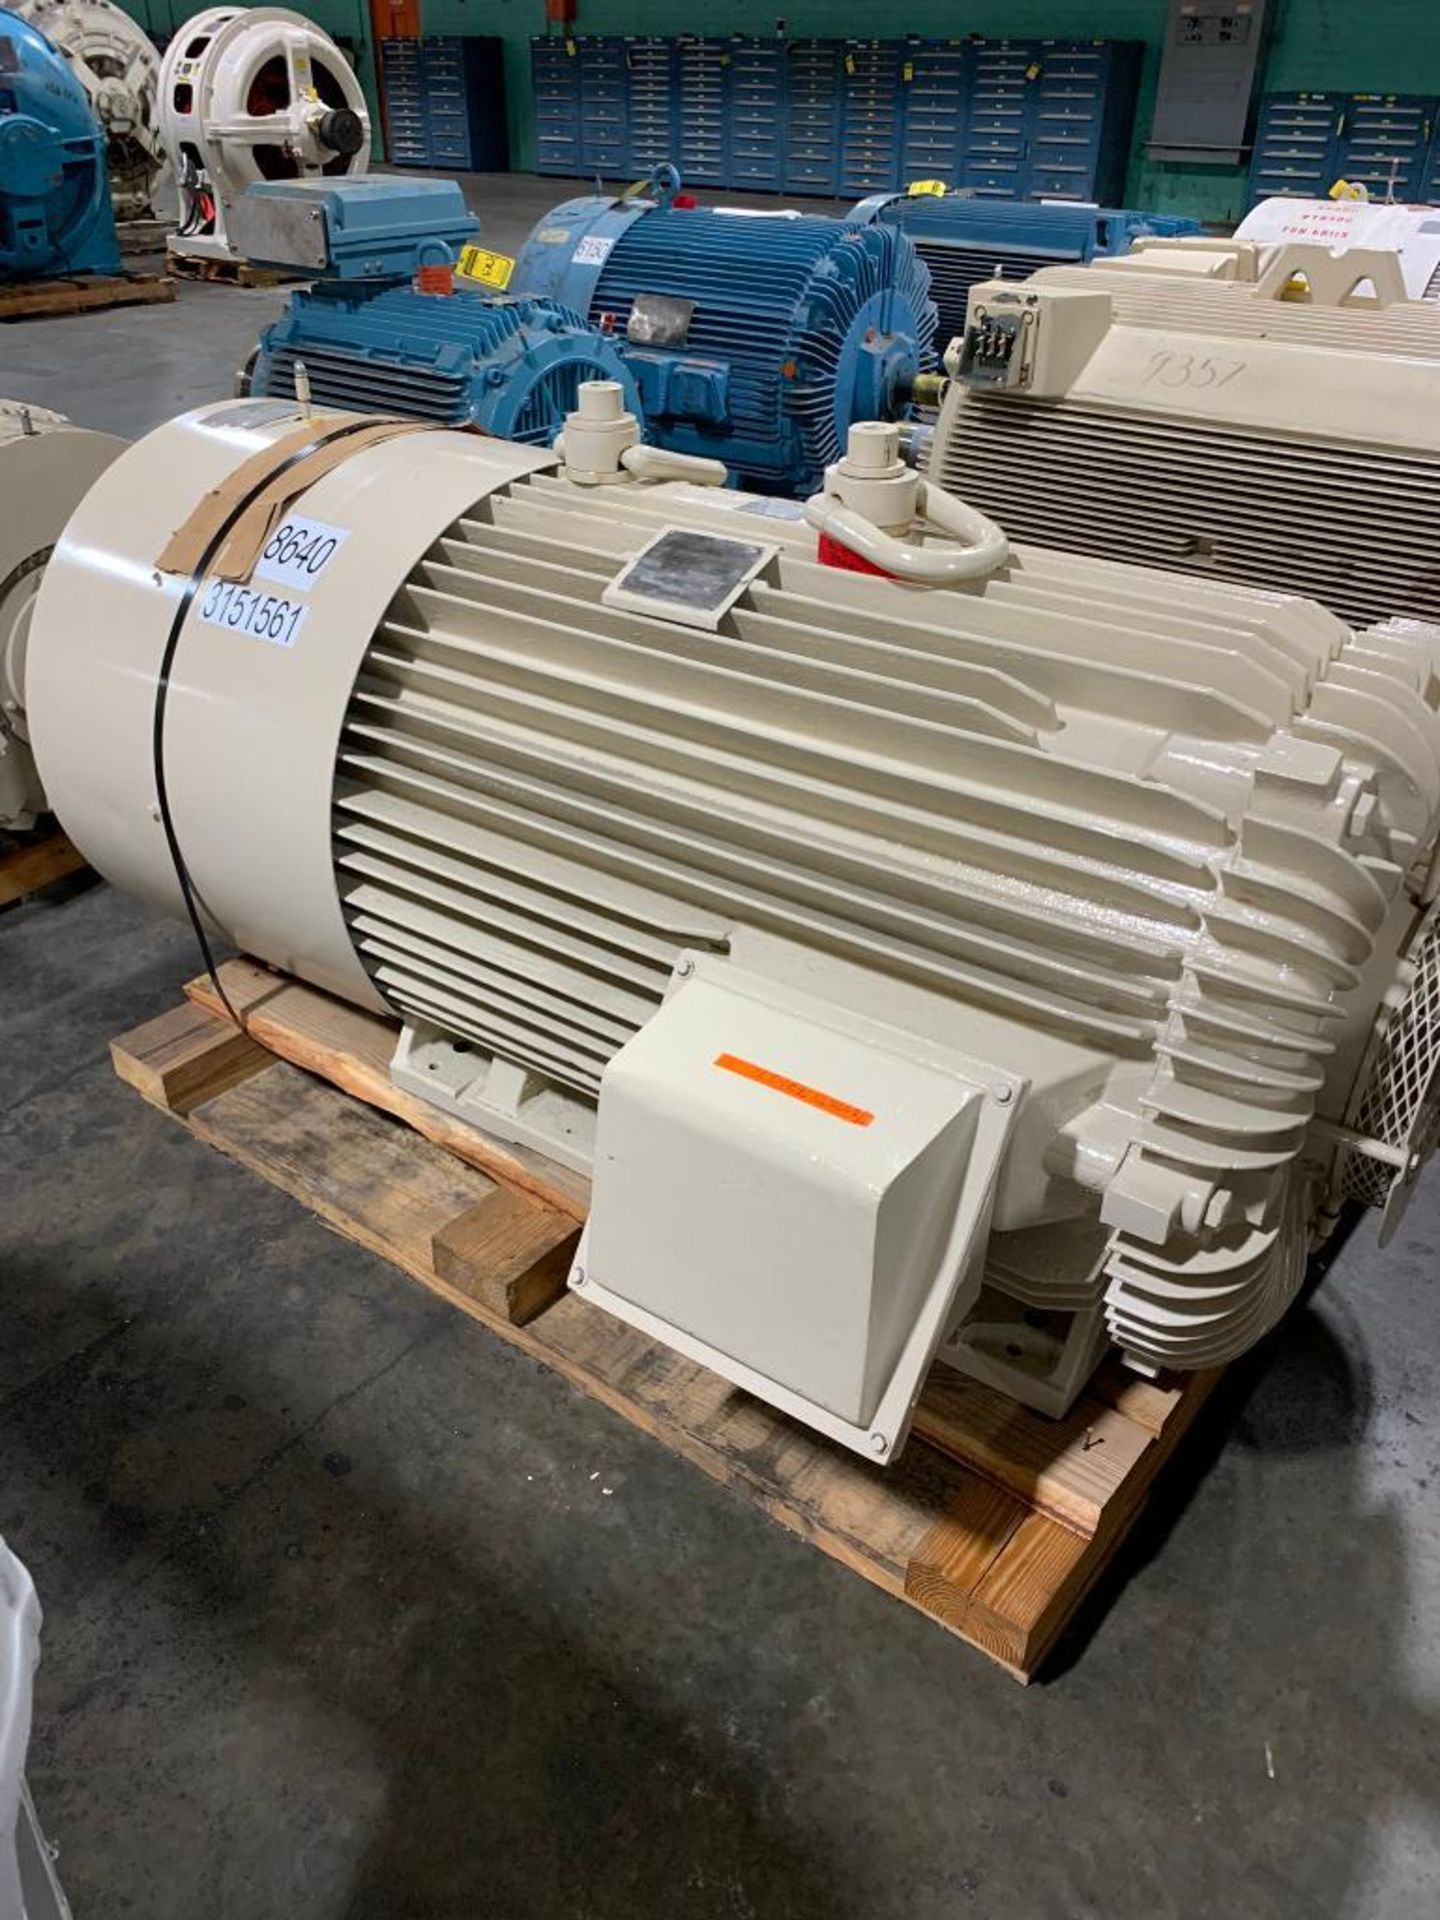 Reliance 700-HP Induction Motor, 1194 RPM, 2300 V, 3 PH, FR: 26EC4810S - Image 3 of 5